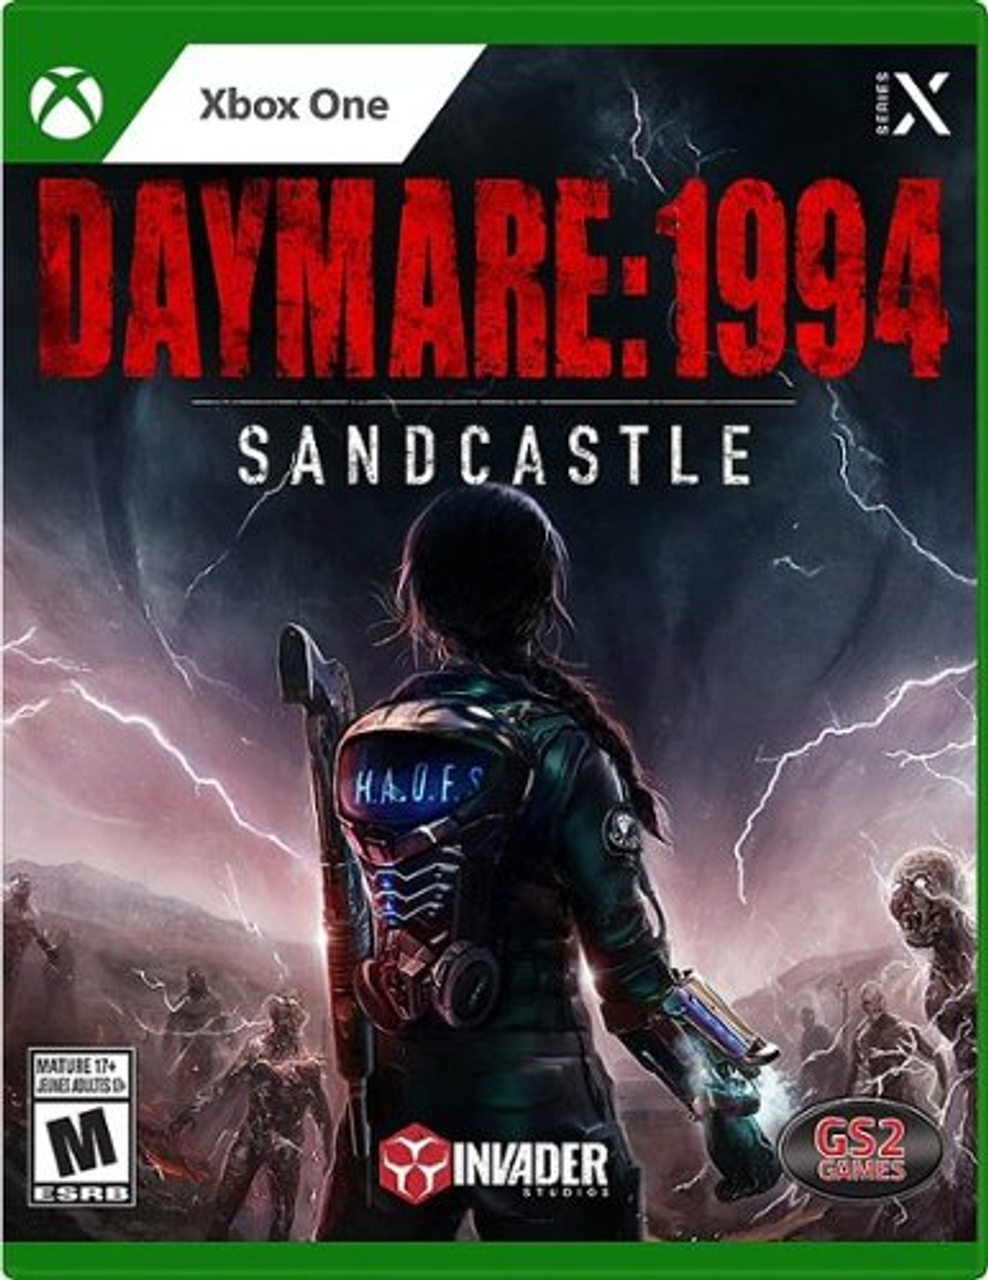 DAYMARE: 1994 SANDCASTLE - Xbox One